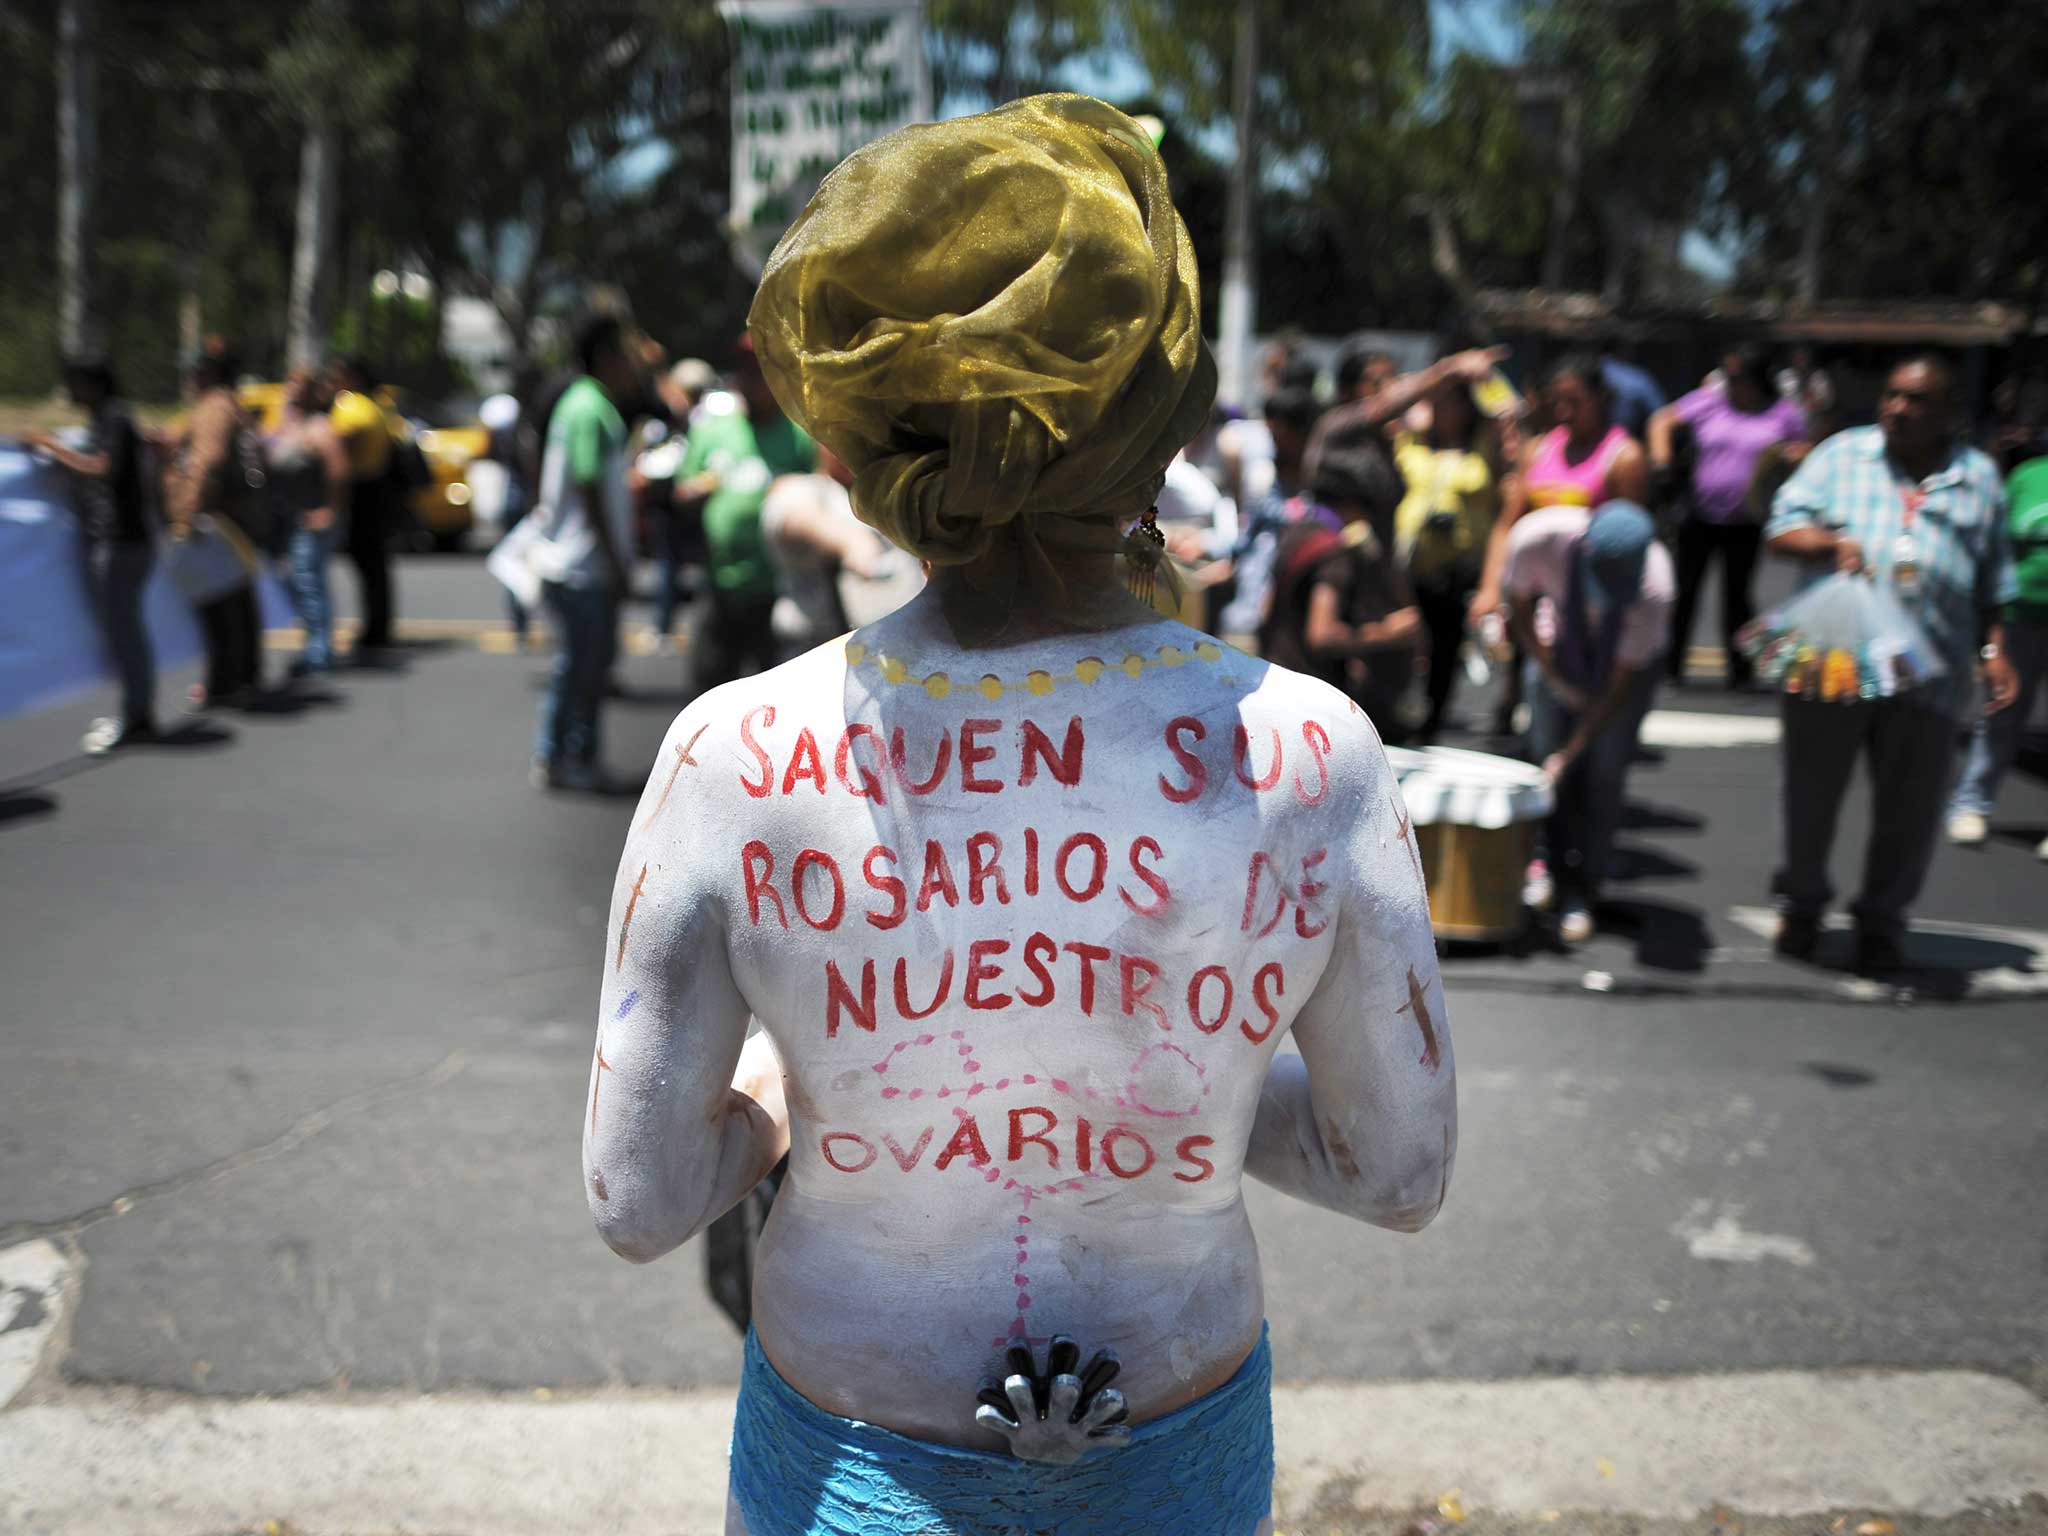 A protester painted with 'Get your rosaries out of our ovaries' on a march in 2013